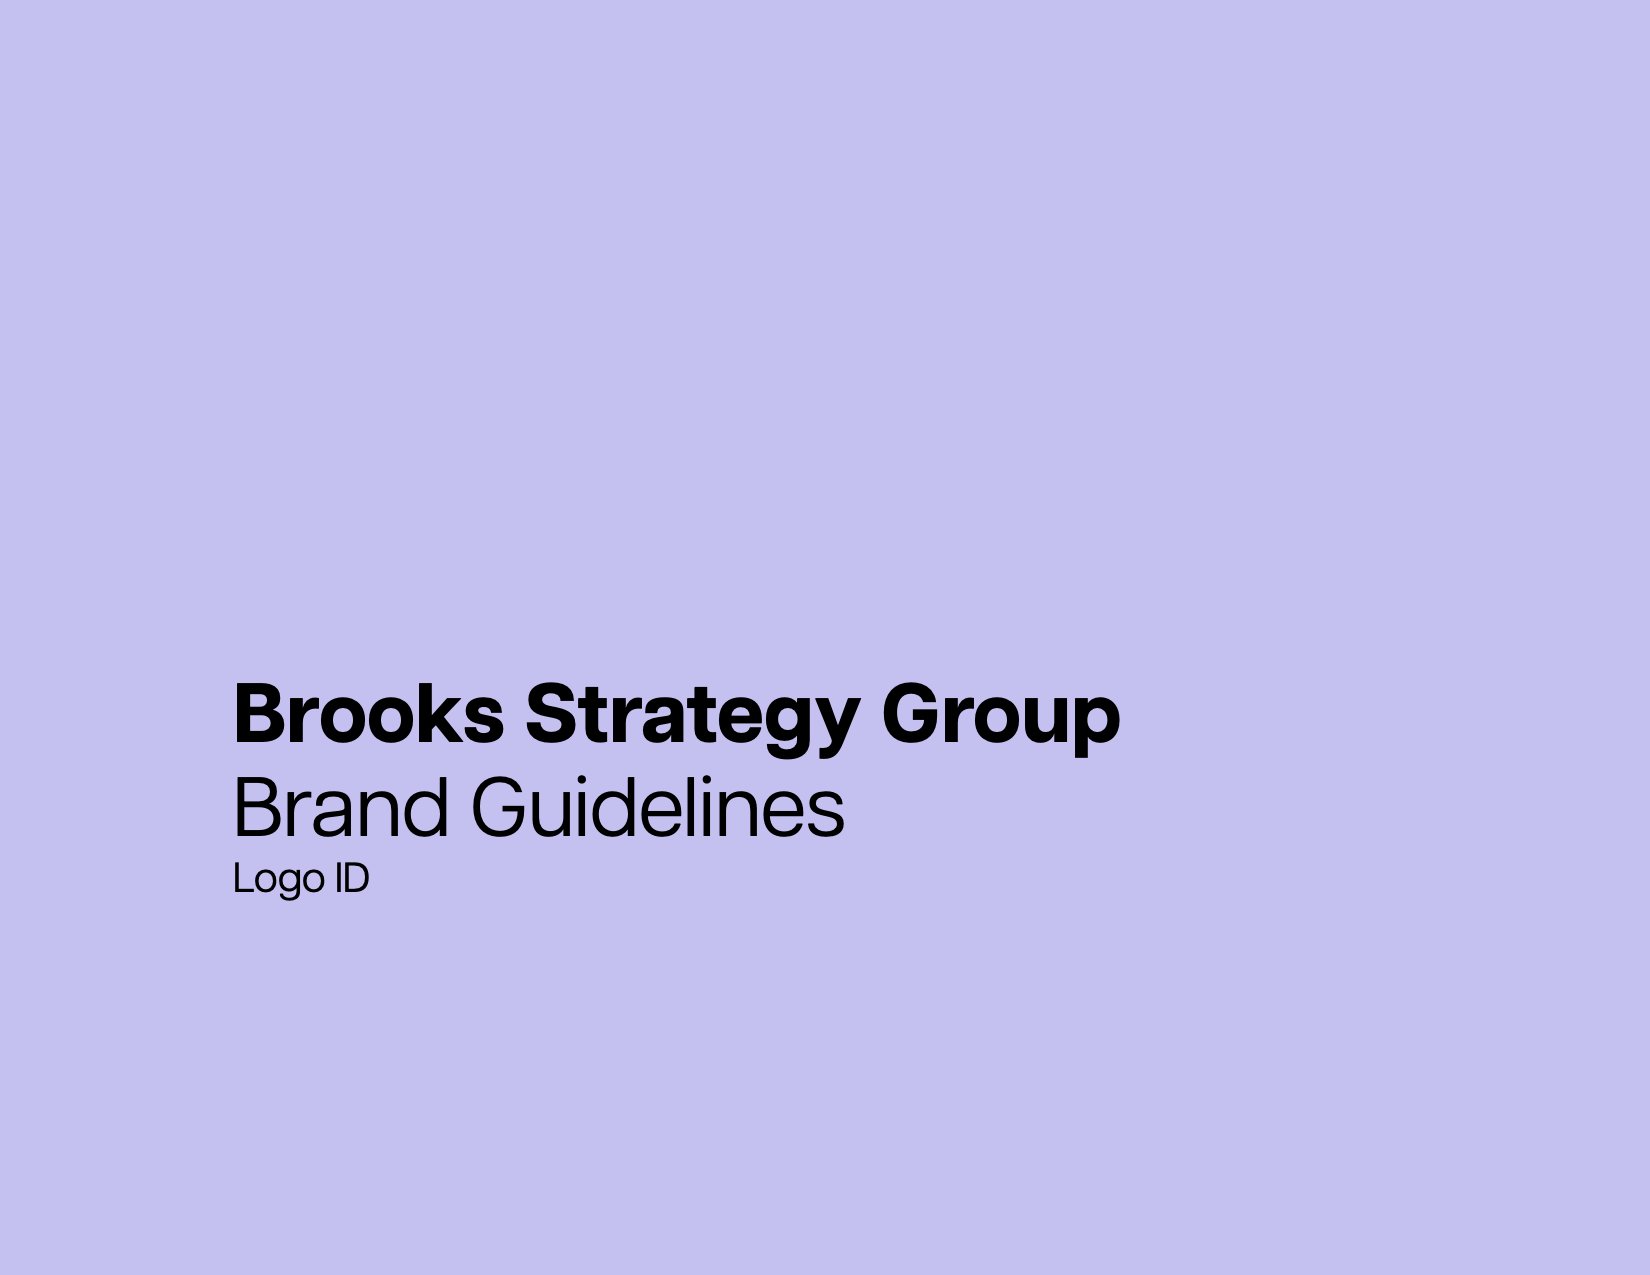 Brooks-brand-guidelines-Final Review.jpg